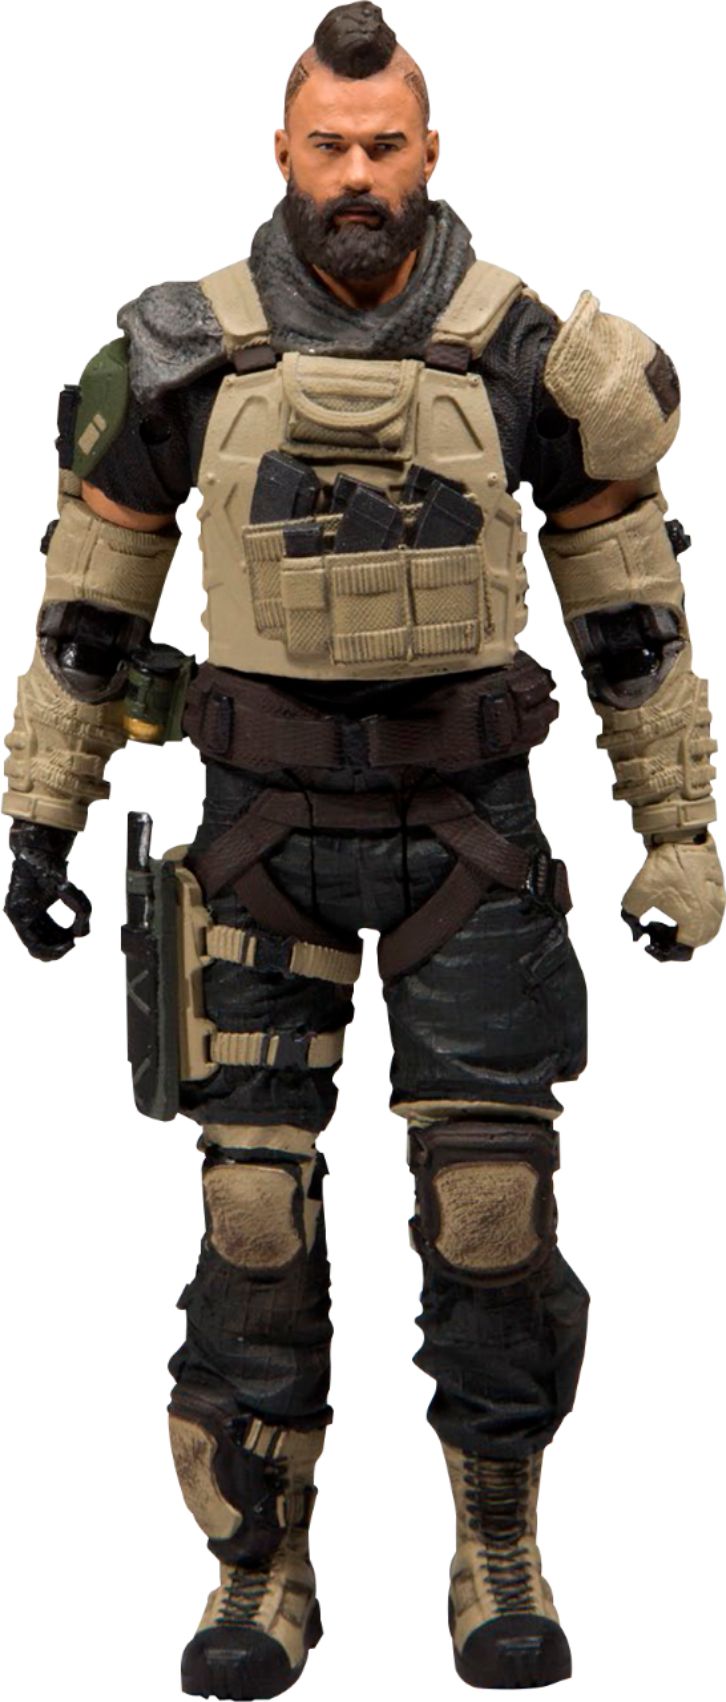 Best Buy: Call of Duty Action Figure Styles May Vary 10400 - 6278209 SD